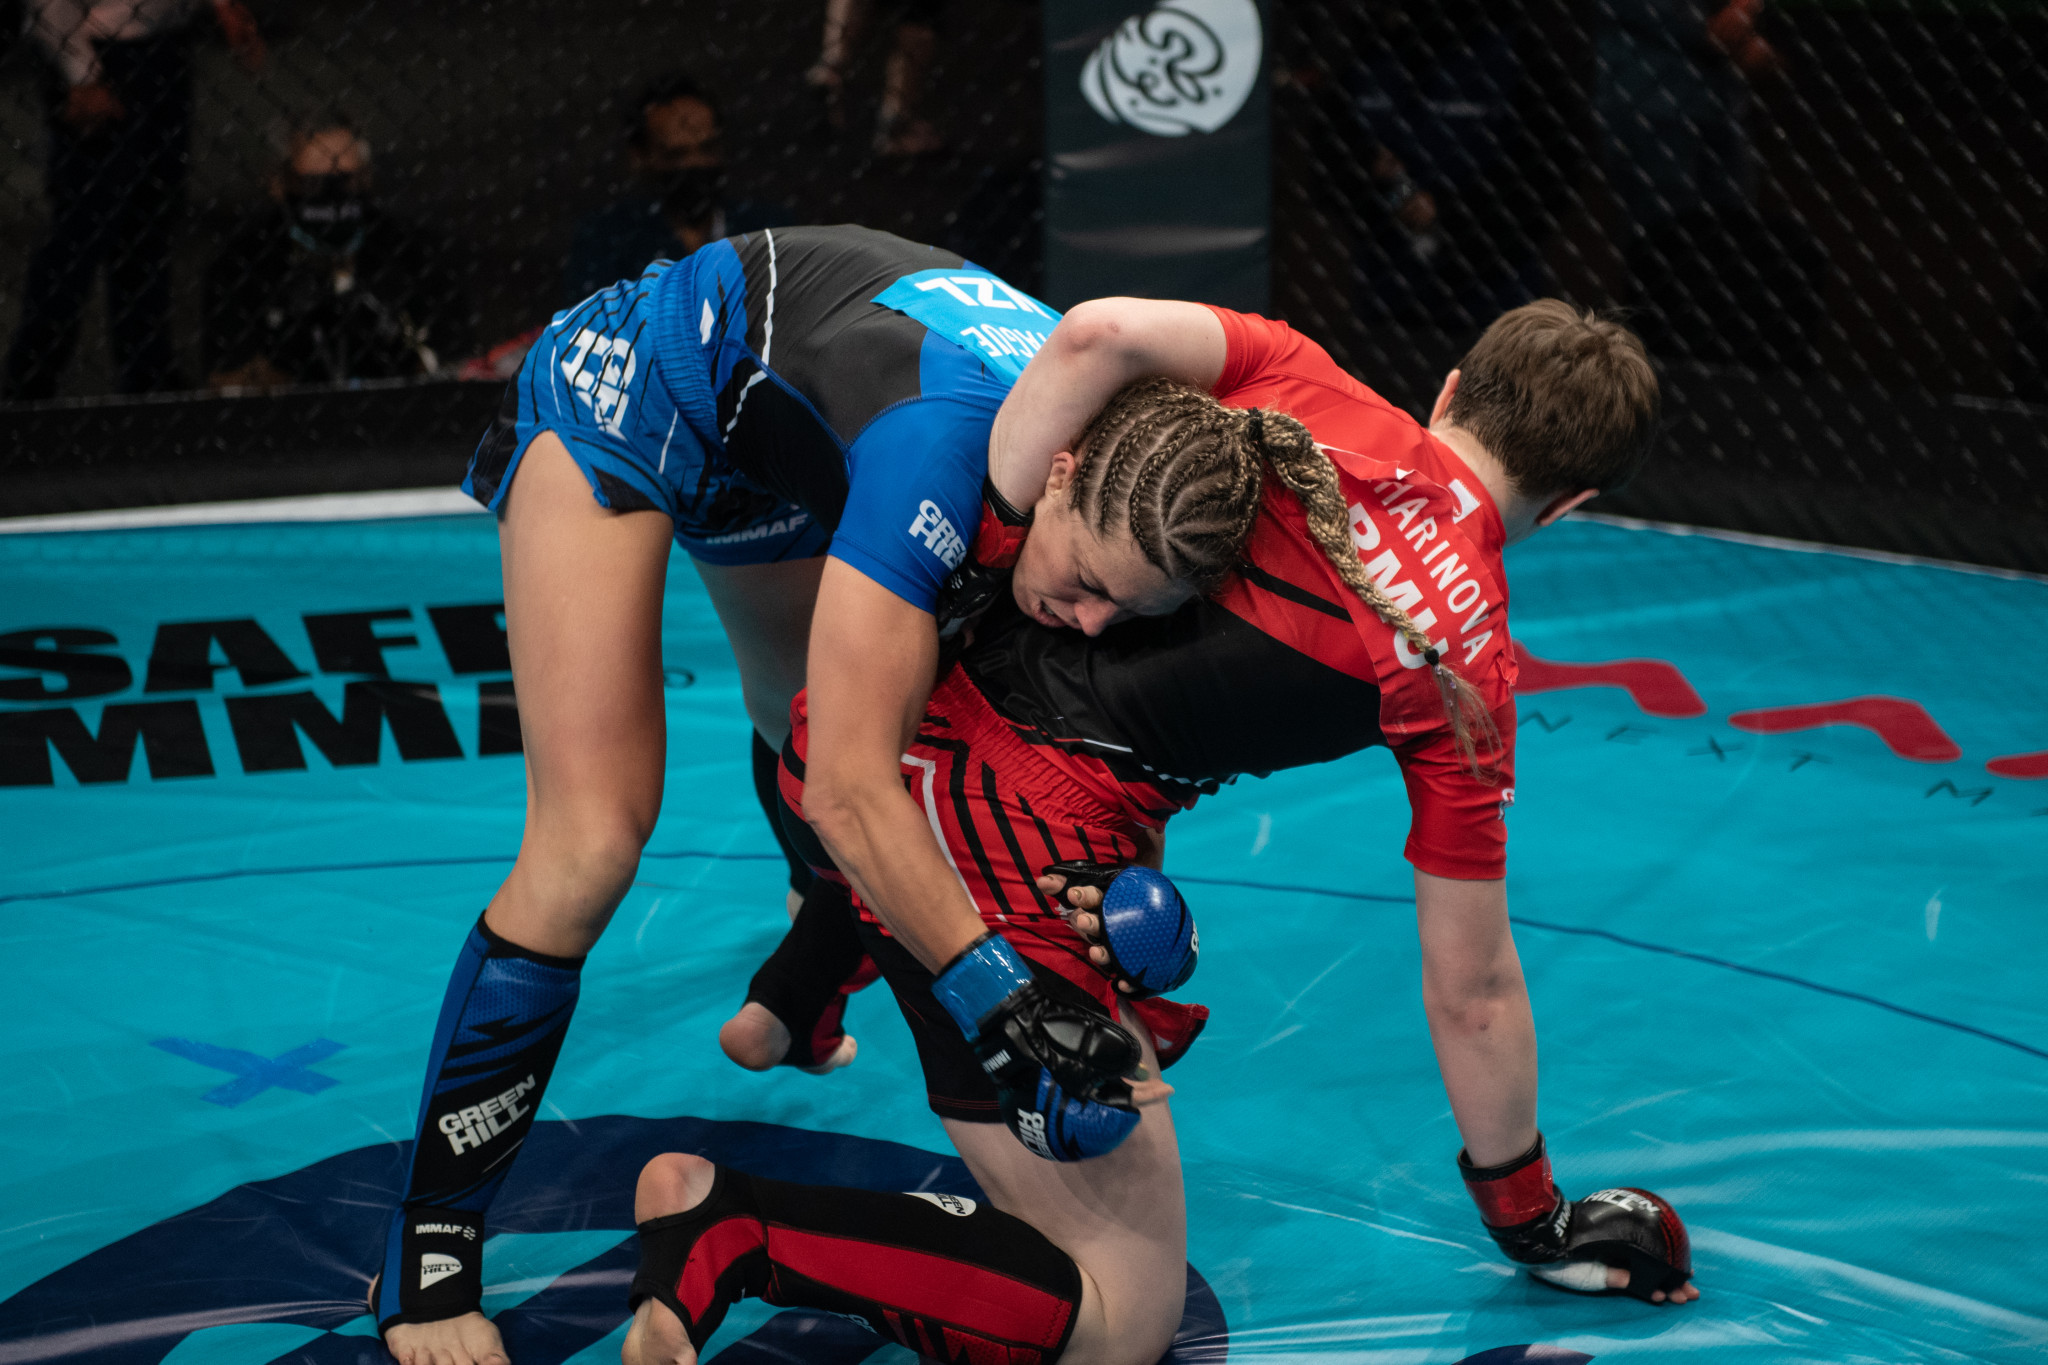 She will now face New Zealand's lightweight champion Michelle Montague, blue, in the last four ©IMMAF